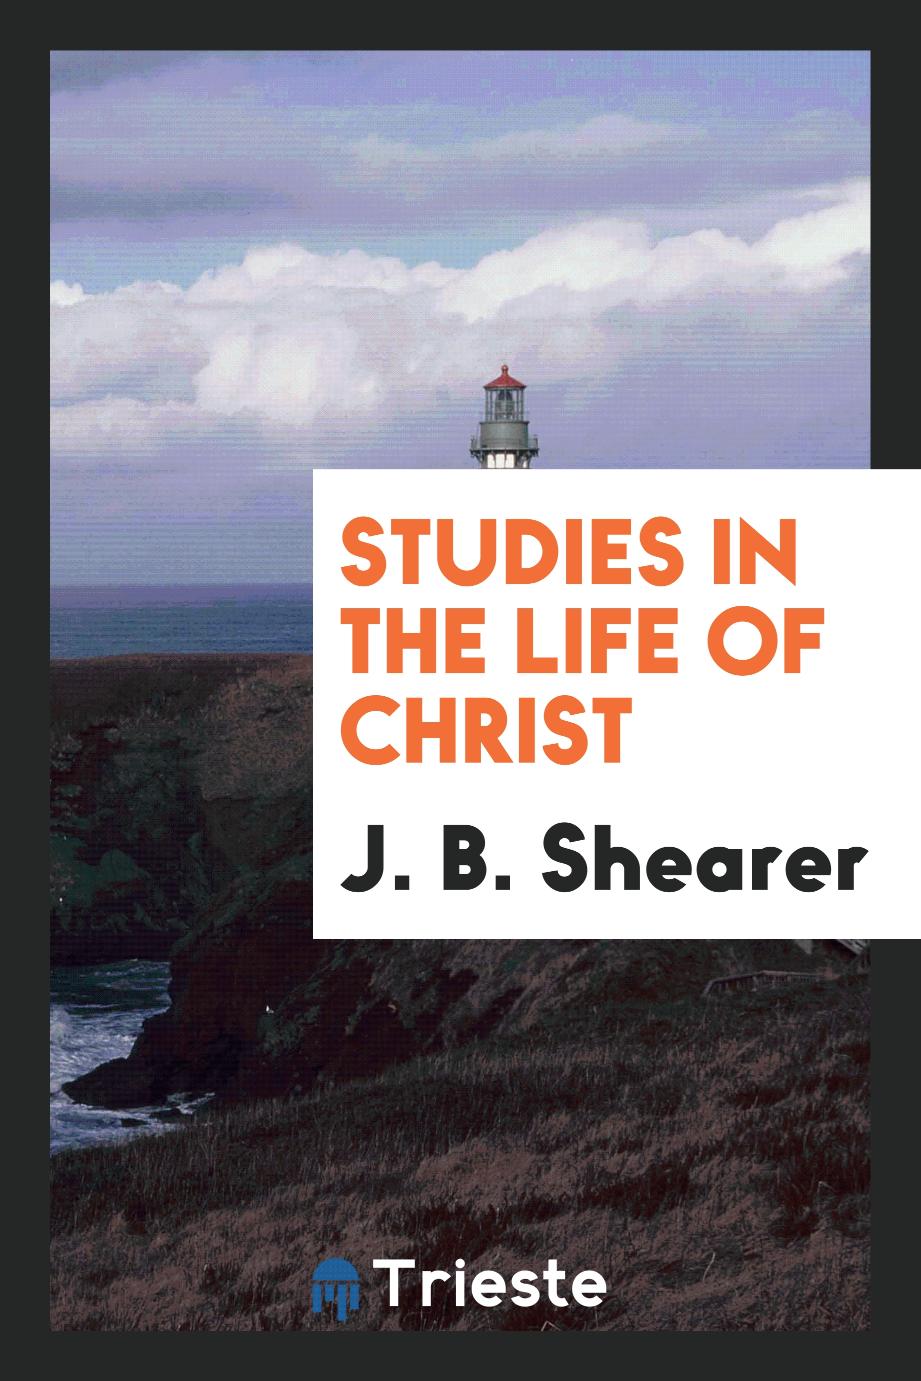 Studies in the life of Christ